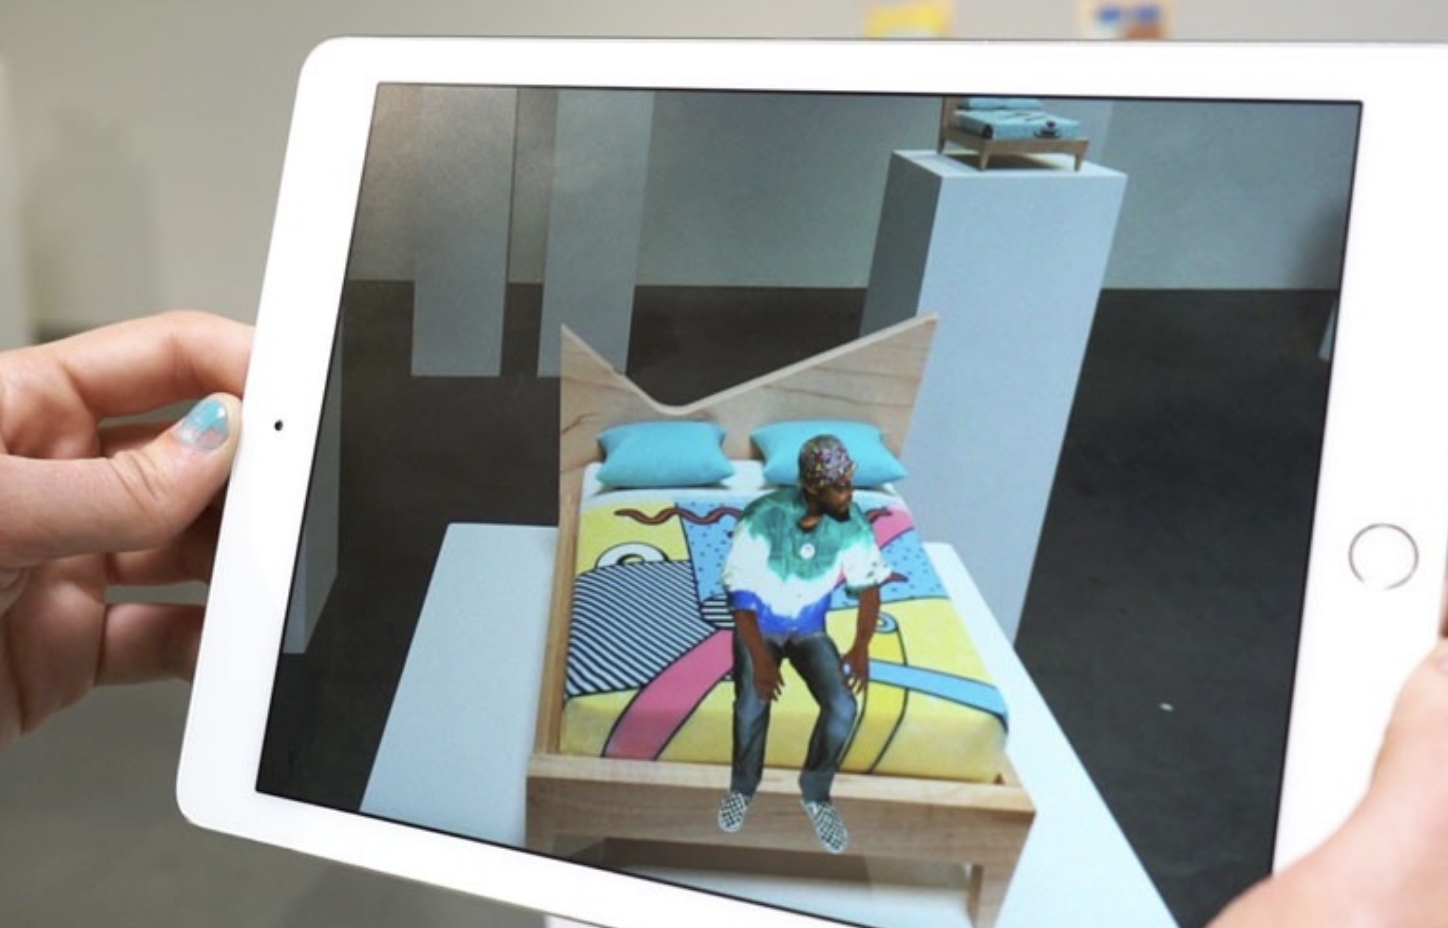 Image of someone holding up an iPad o one of Gabe's installation pieces. One the iPad you see an animated figure sitting on the bed, which isn't present in "real life".